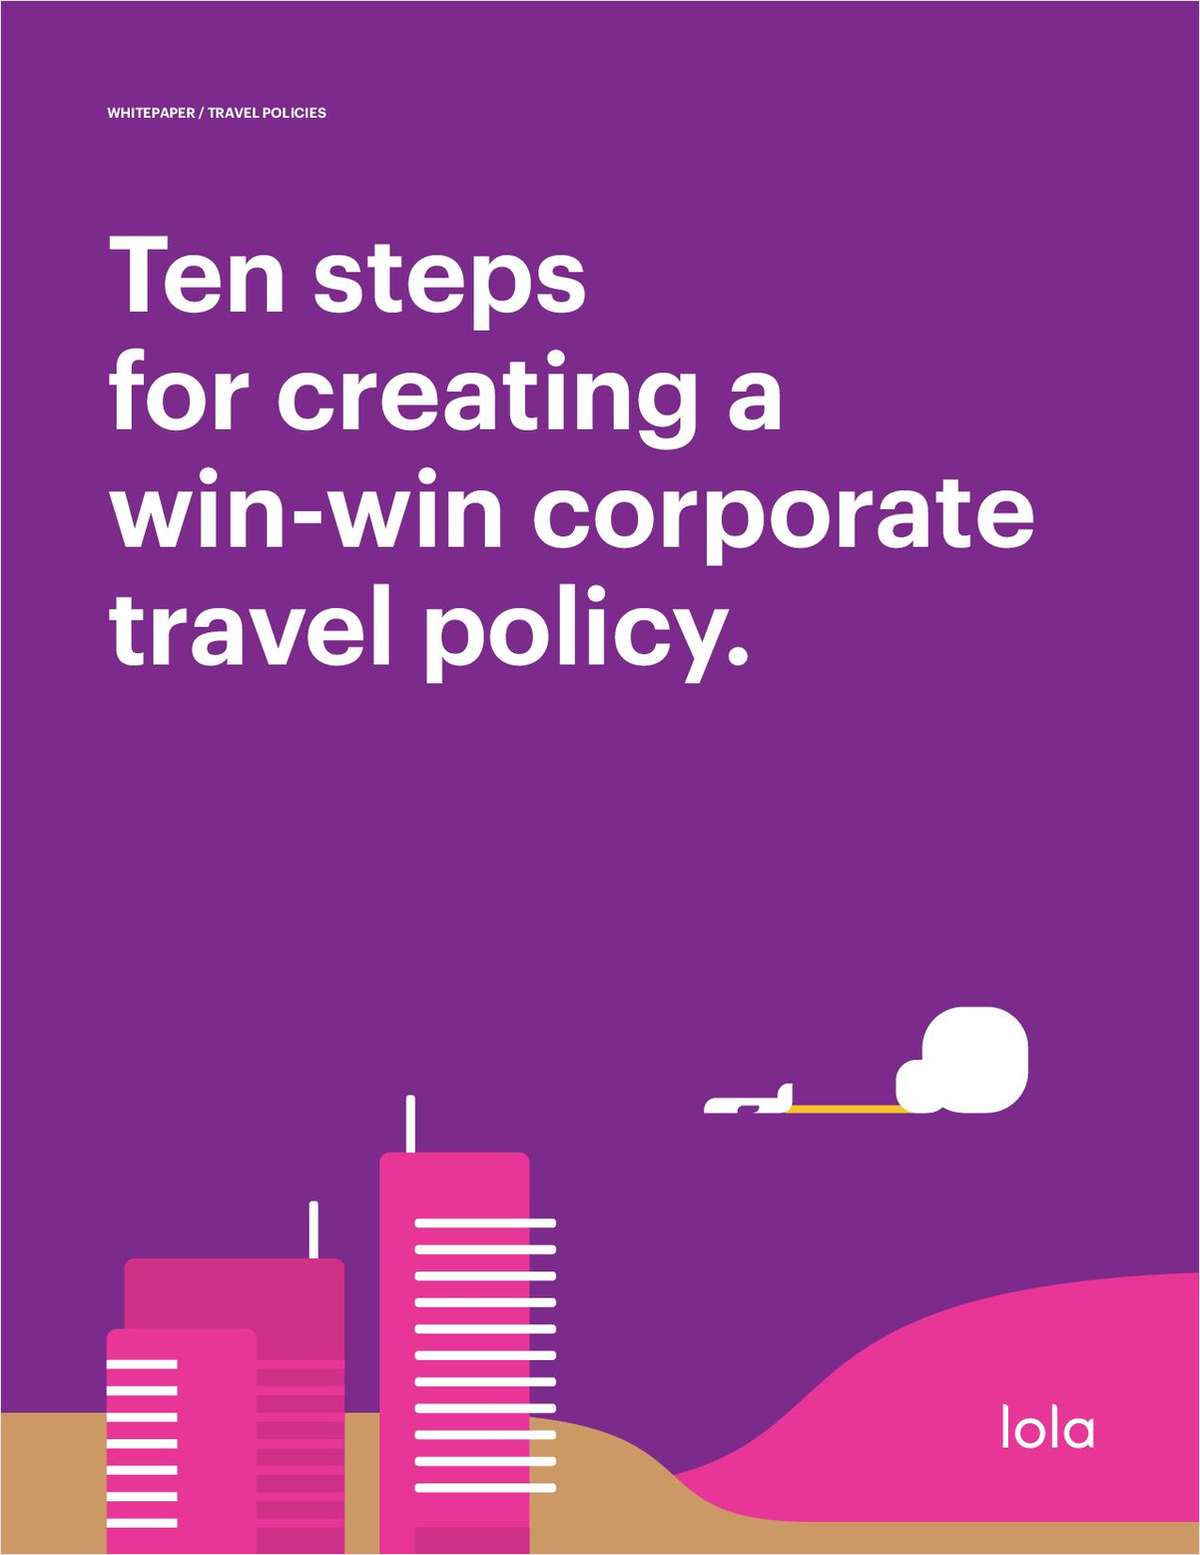 Ten Steps for Creating a Win-Win Corporate Travel Policy